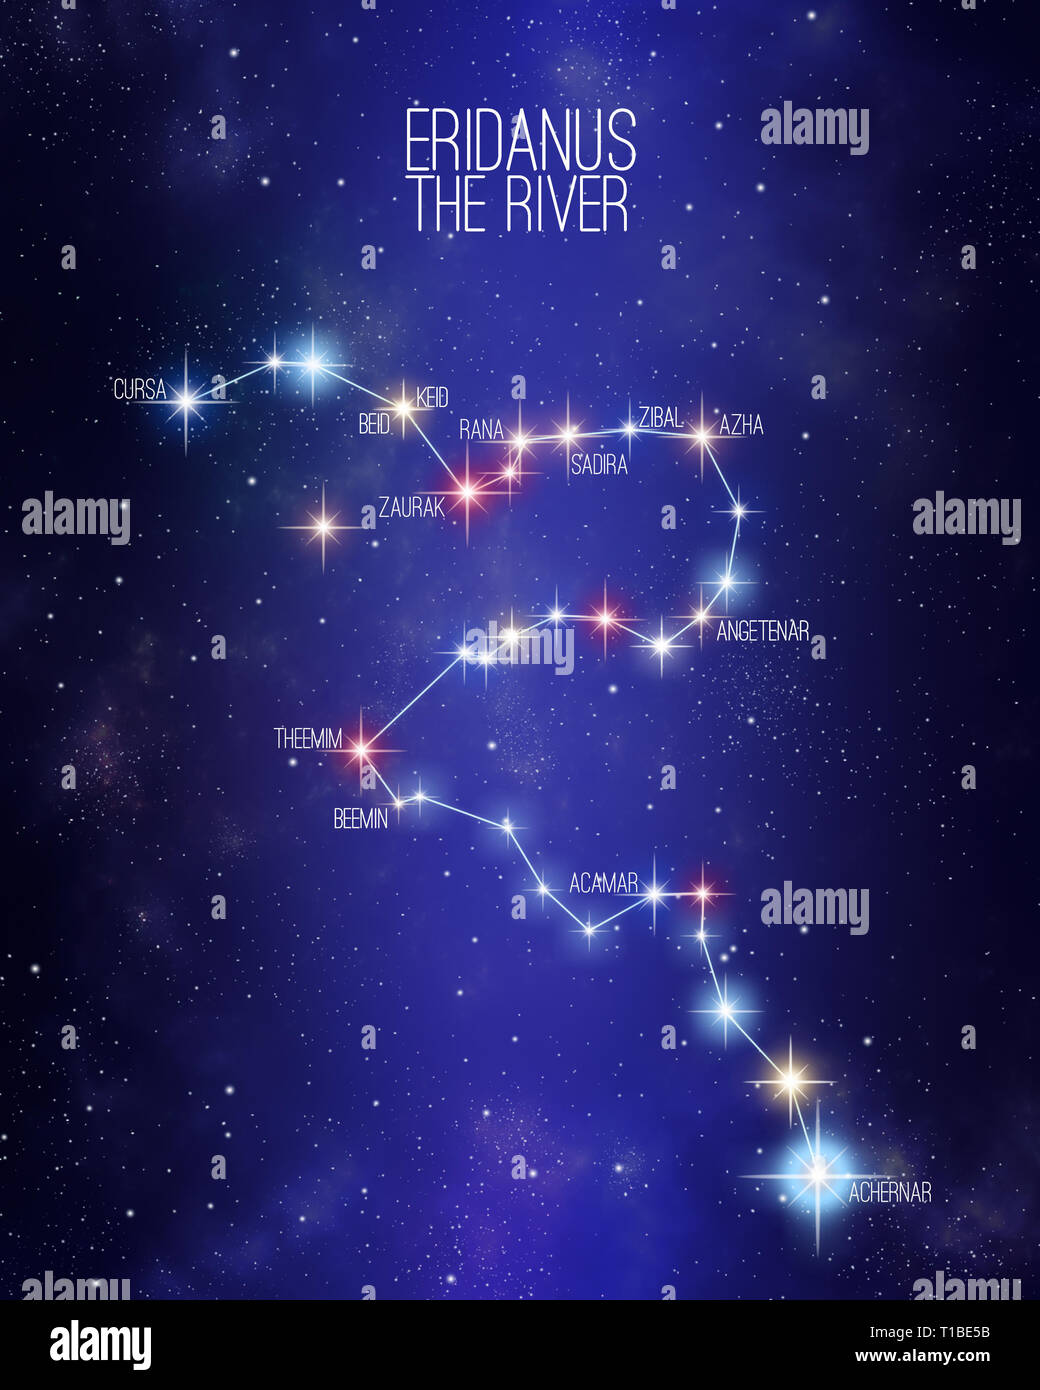 Eridanus the river constellation on a starry space background with the names of its main stars. Relative sizes and different color shades based on the Stock Photo